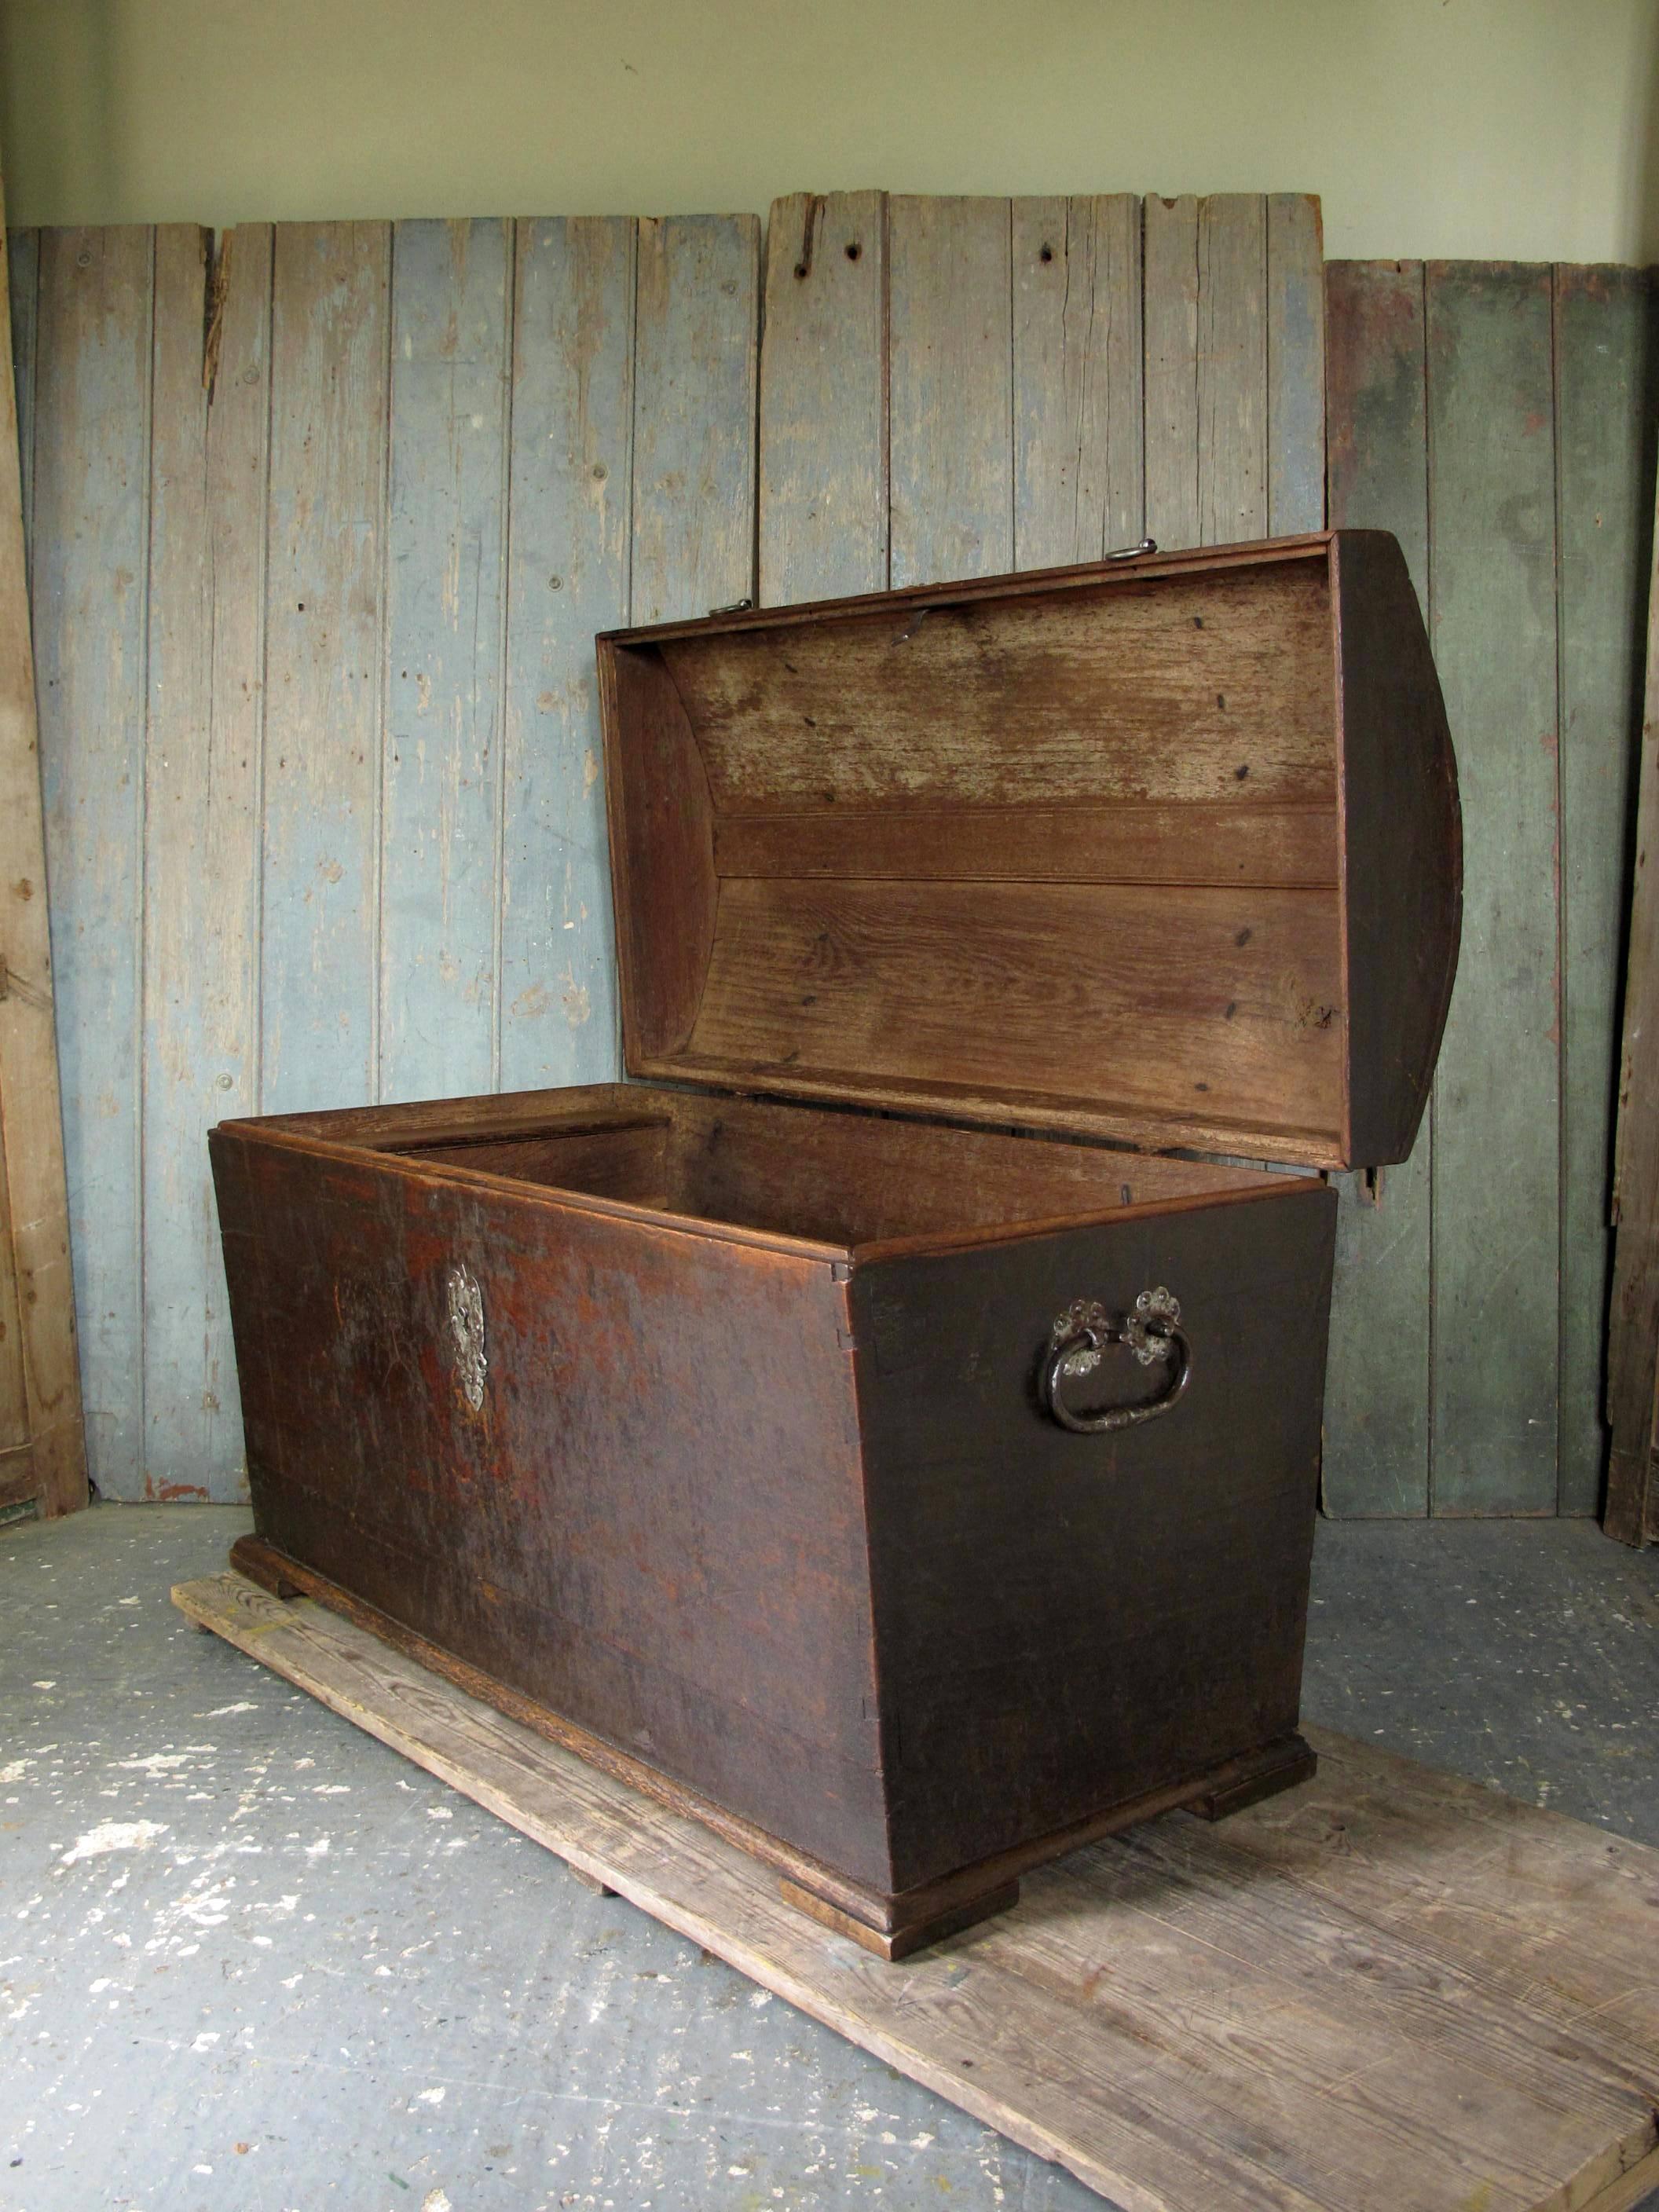 With wrought iron straphinges and carry handles. 'Tinned' steel escutcheon and fittings. Internal candle box with lid. Treated for woodworm, and waxed externally. Dating from the 18th century, with later repair to corner of lid.